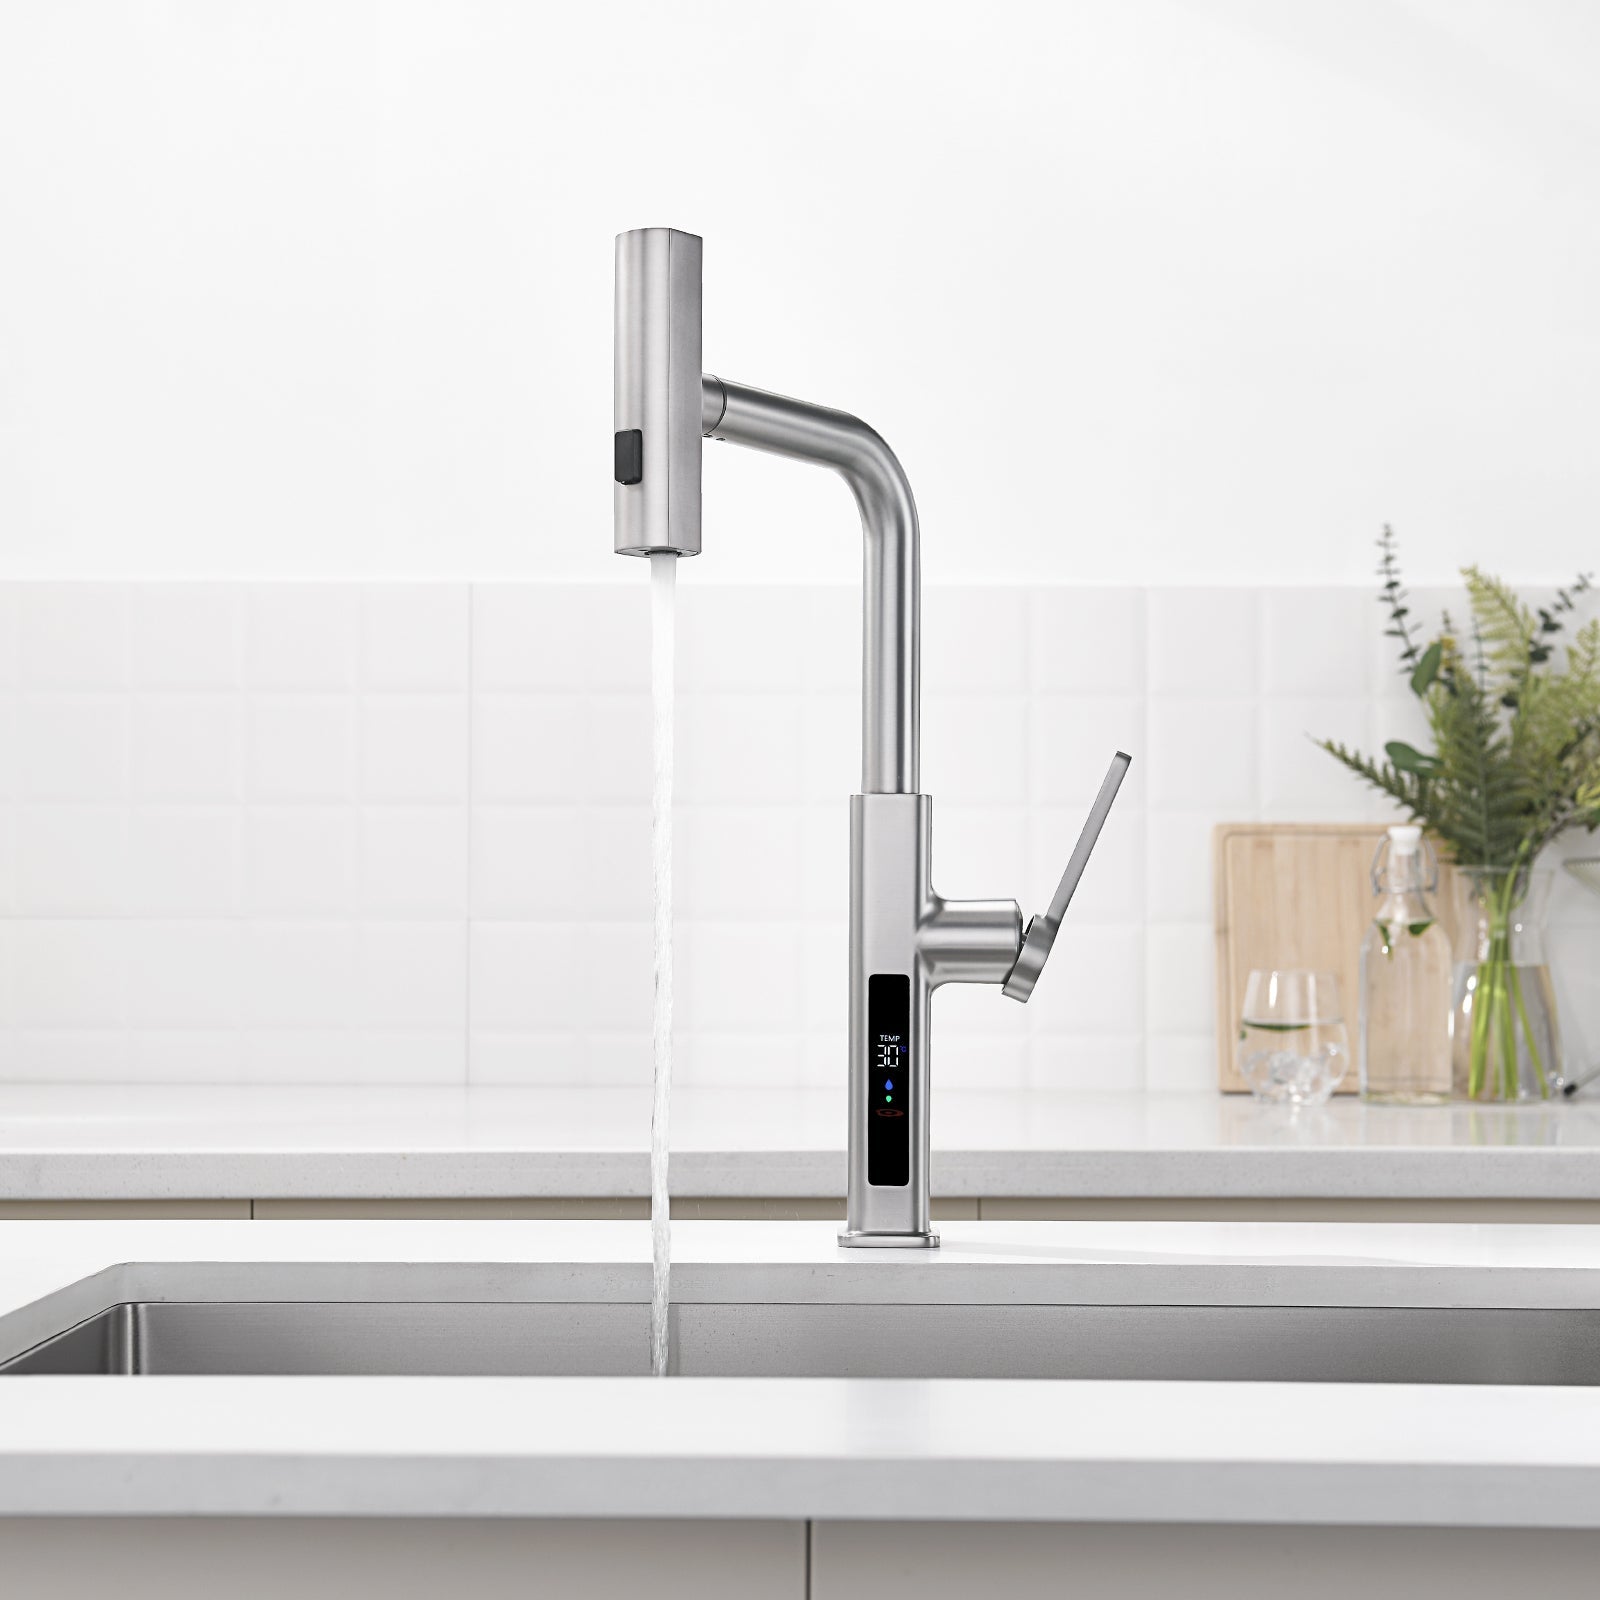 Lefton Waterfall & Pull-Out Kitchen Faucet with Temperature Display-KF2209 -Kitchen Faucets- Lefton Home